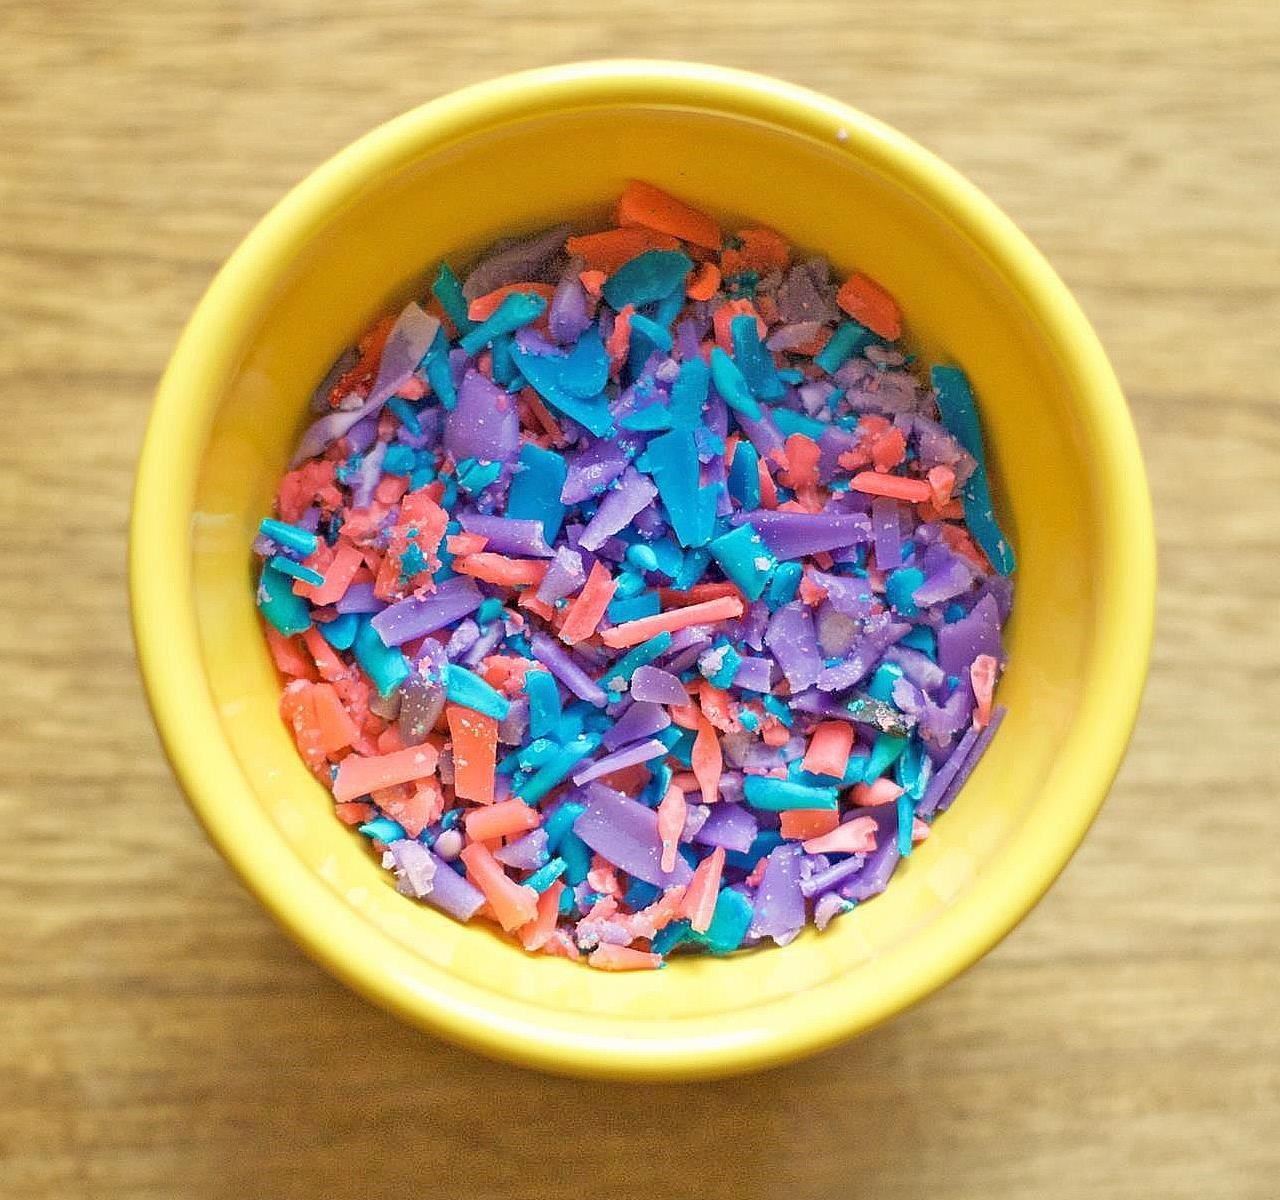 Brighten Up Your Baked Goods with DIY Sprinkles